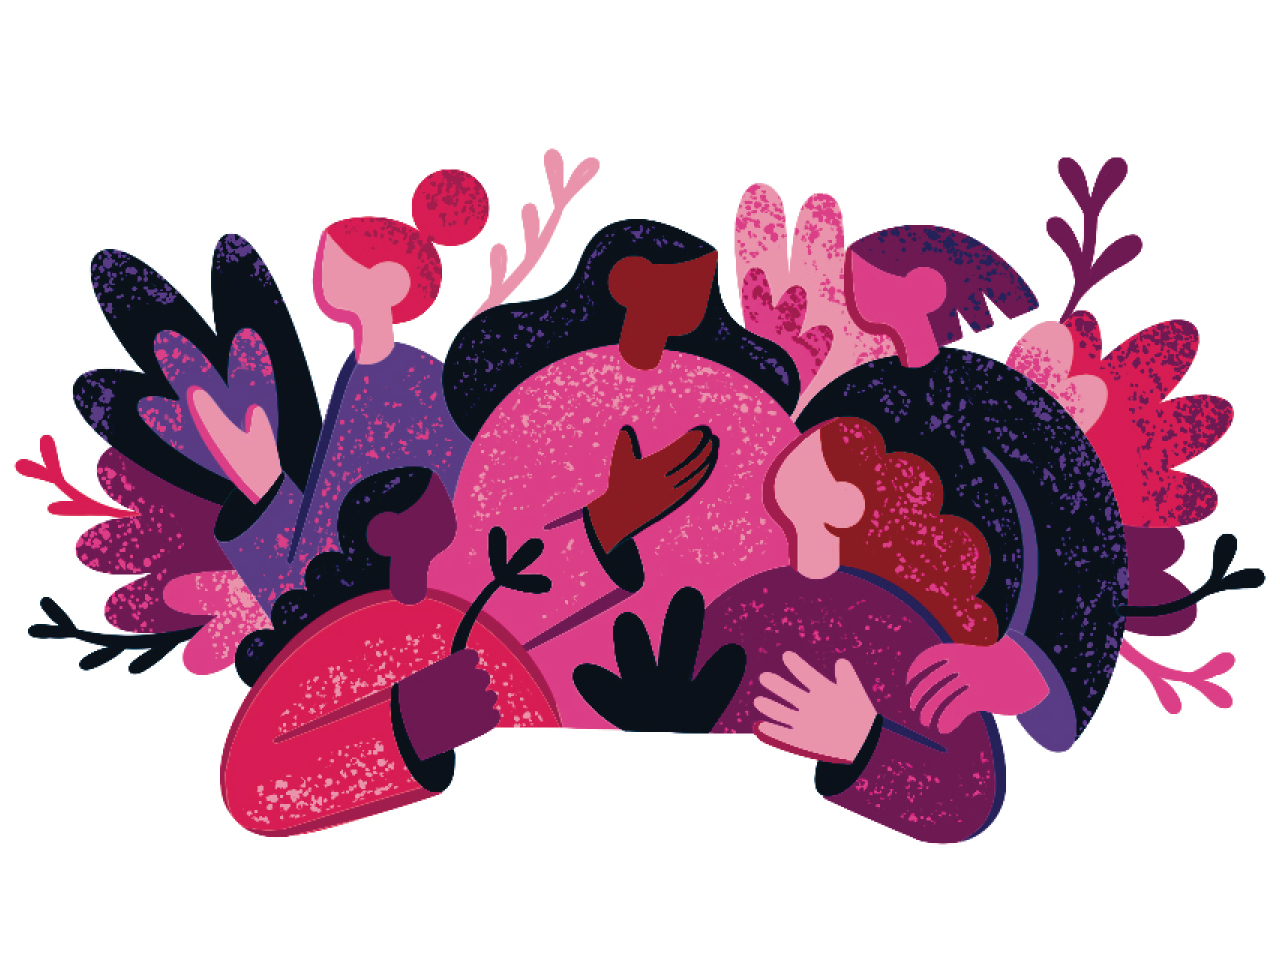 A pink illustration of a group of women embracing each other, with decorative flowers entwining them